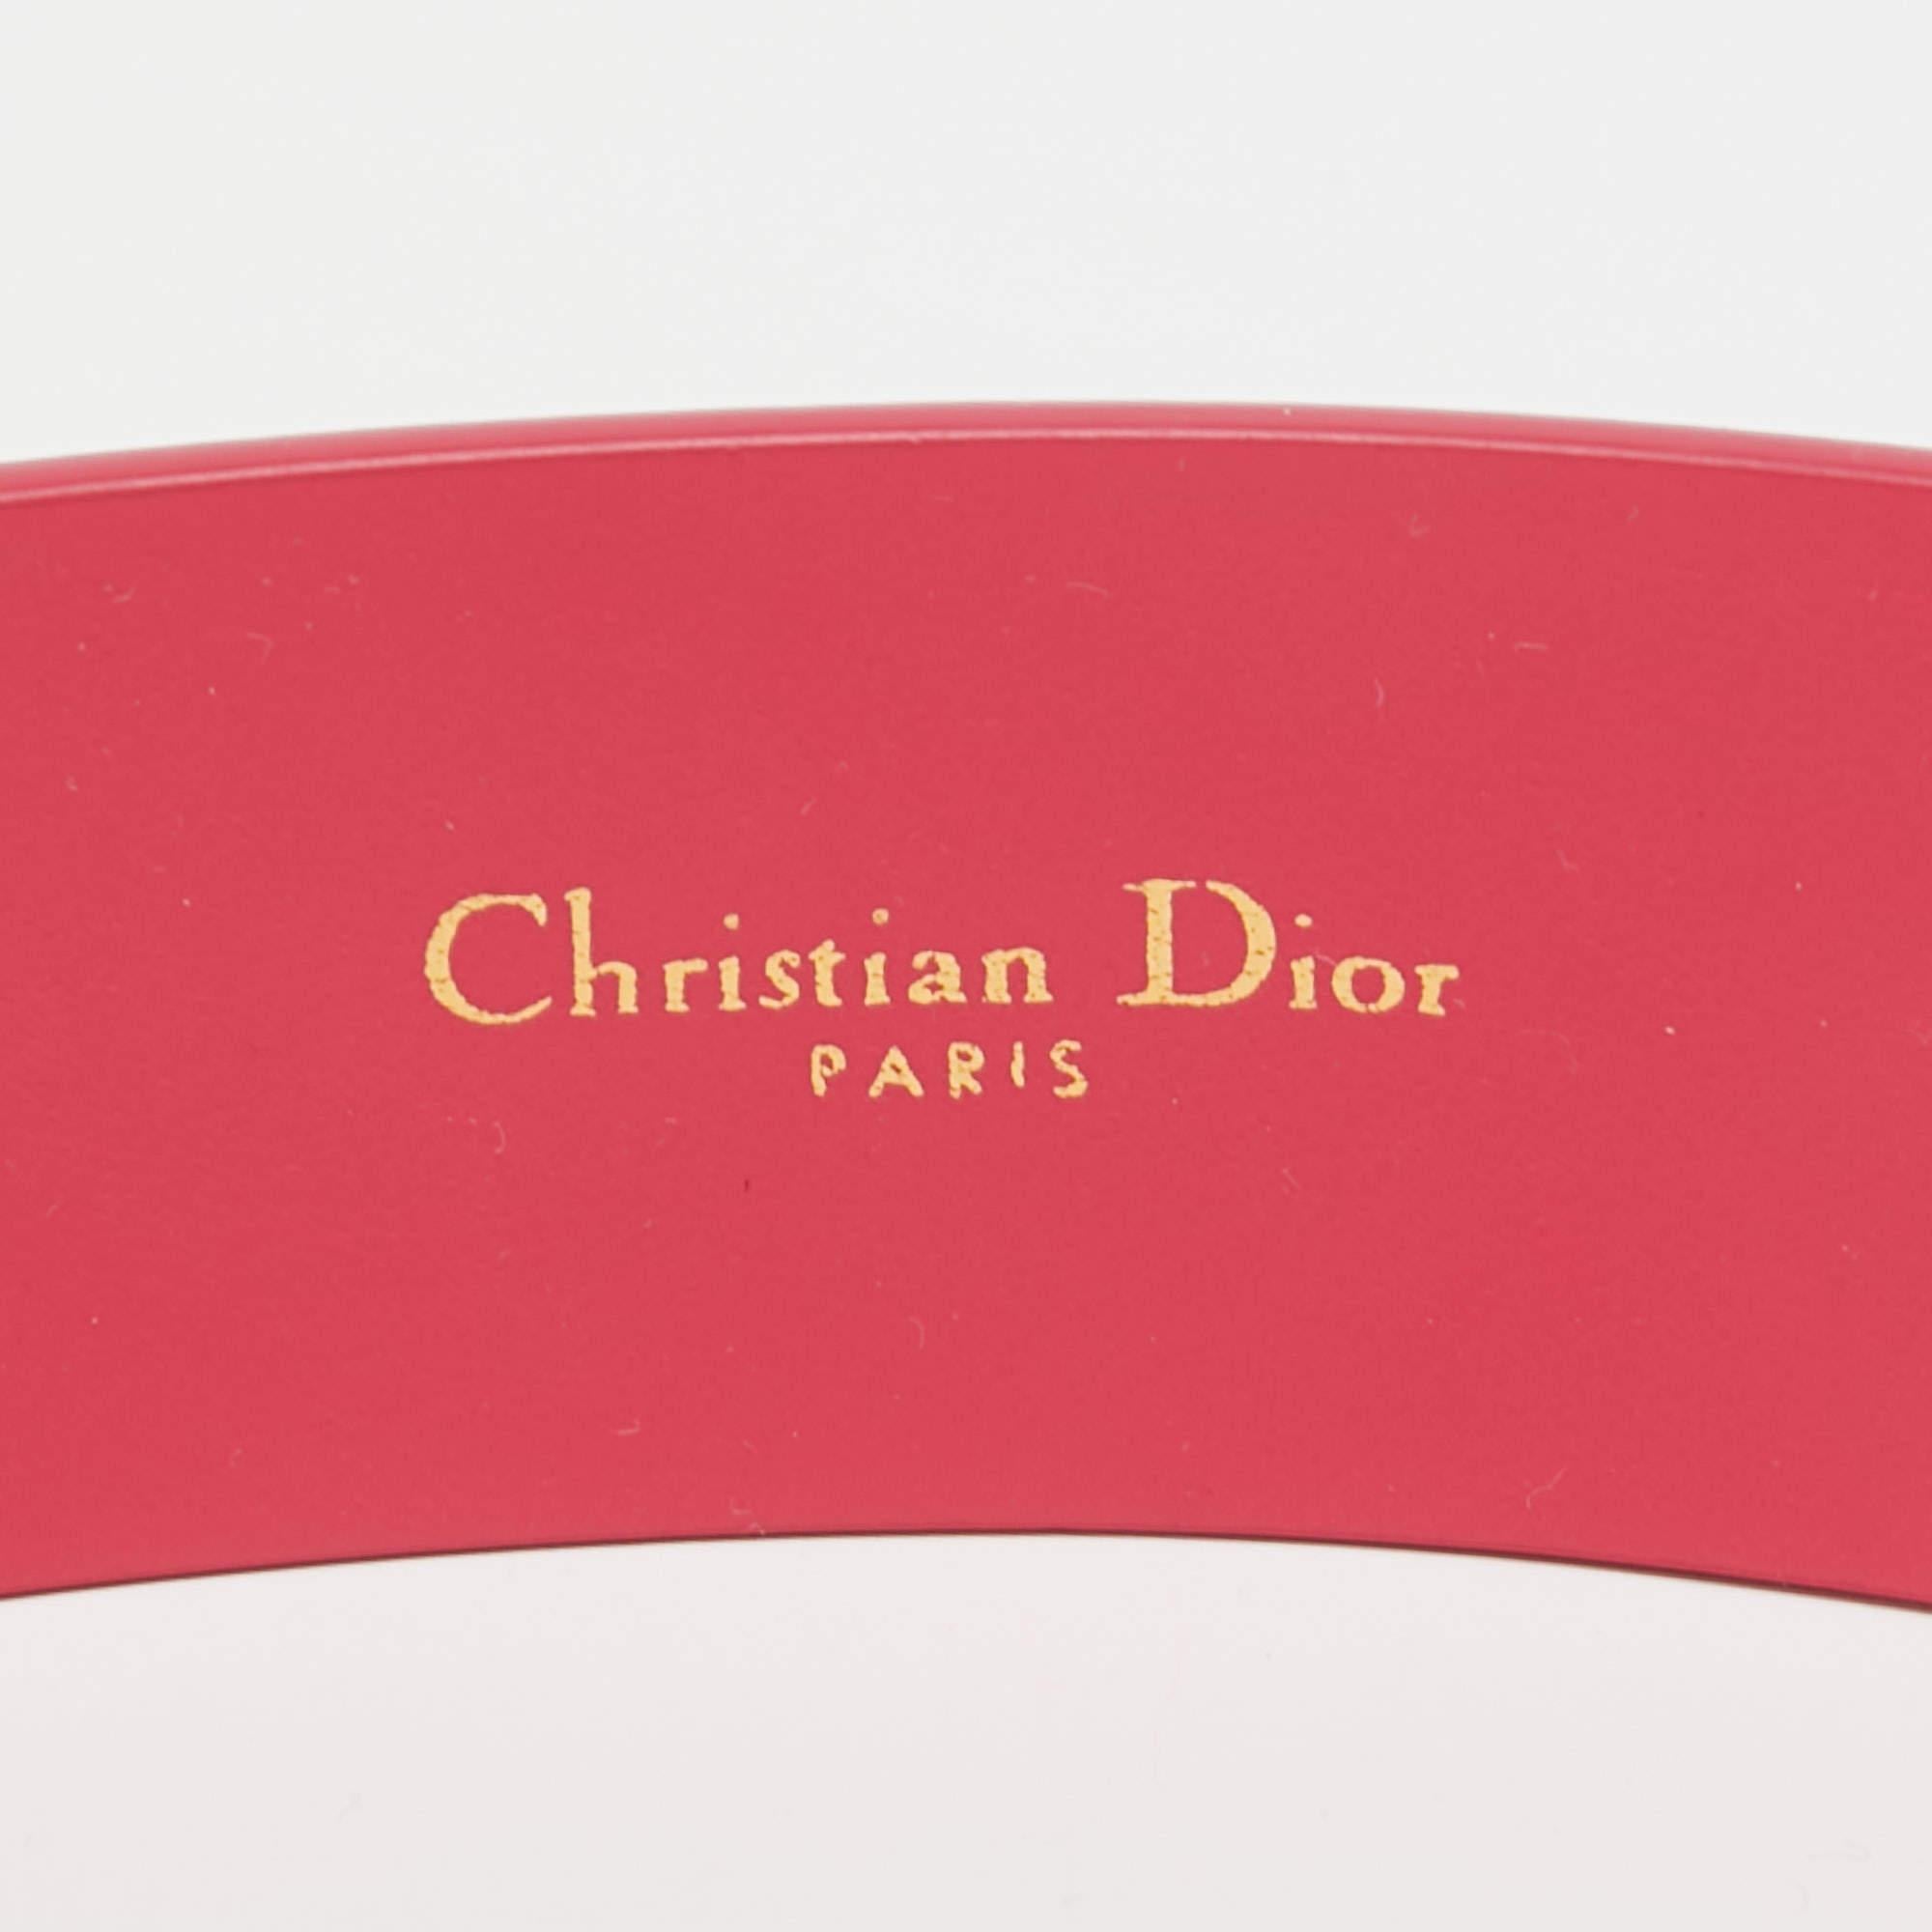 Accessorize like a fashionista using this amazing belt by Dior. The piece is crafted from leather in a pink hue and completed with a 'CD' logo buckle. It has a single loop that helps in seamlessly fastening it.

Includes: Original Dustbag, Original